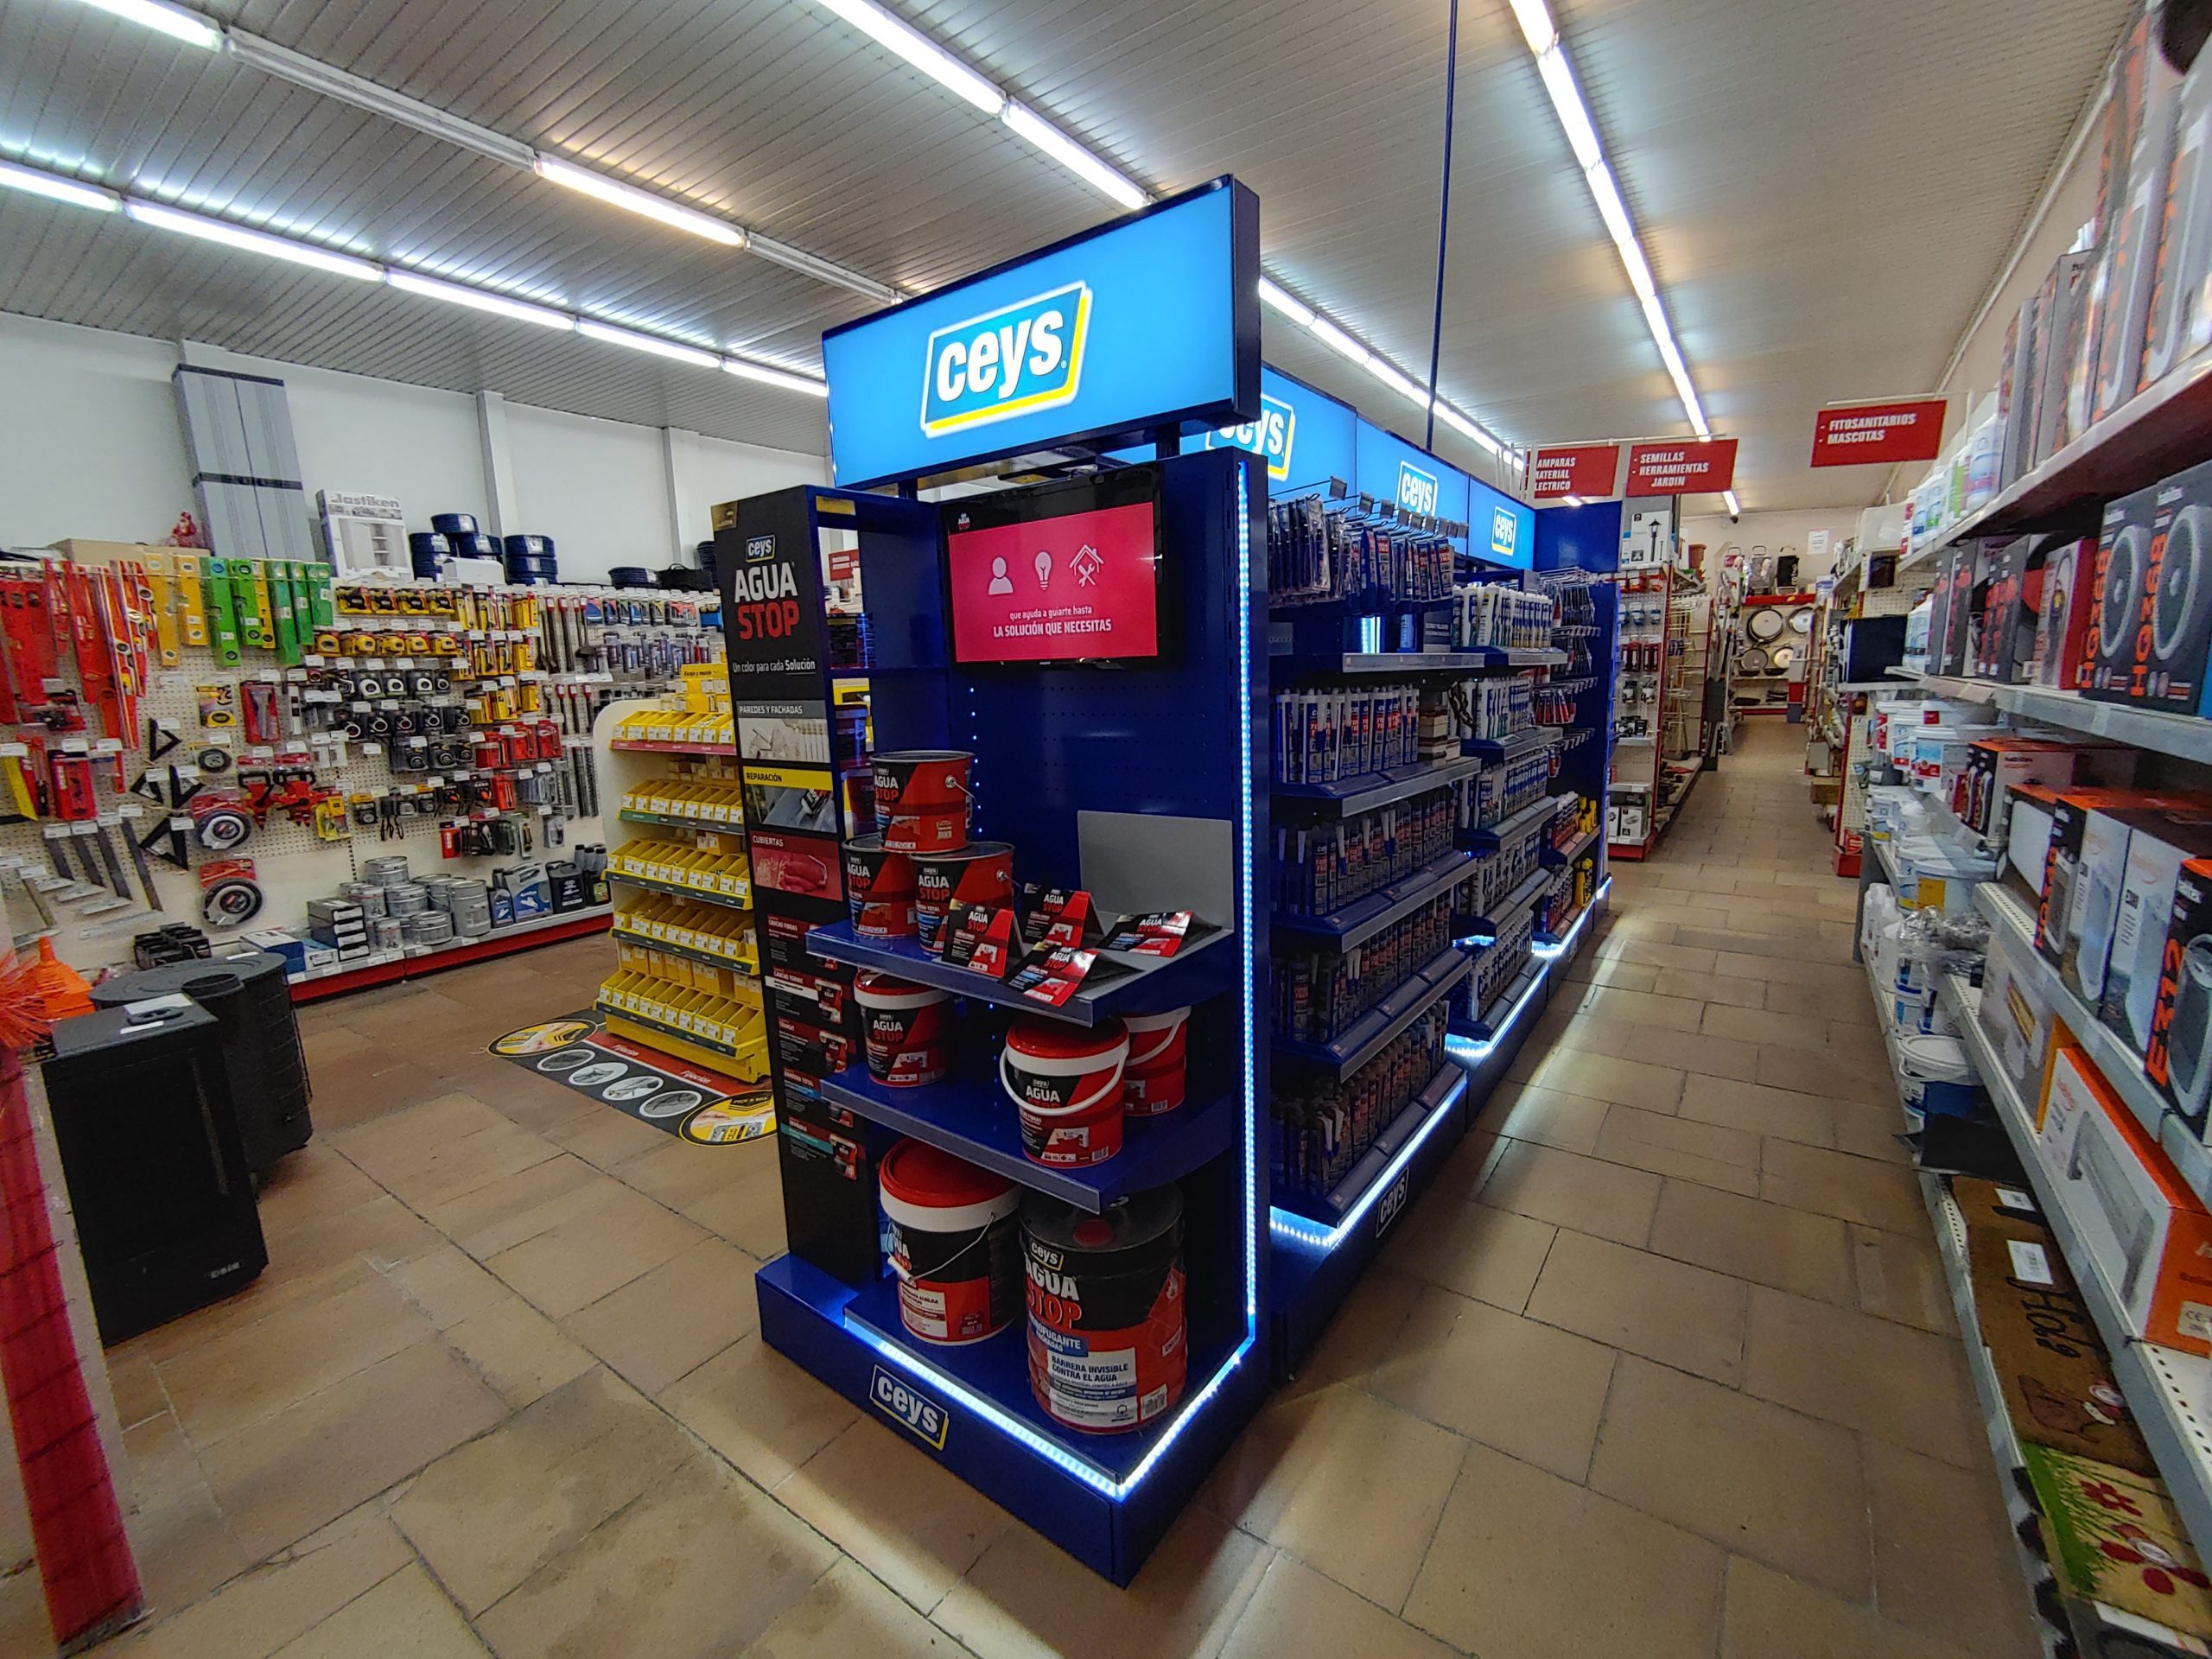 Ceys Point-of-Sale Display